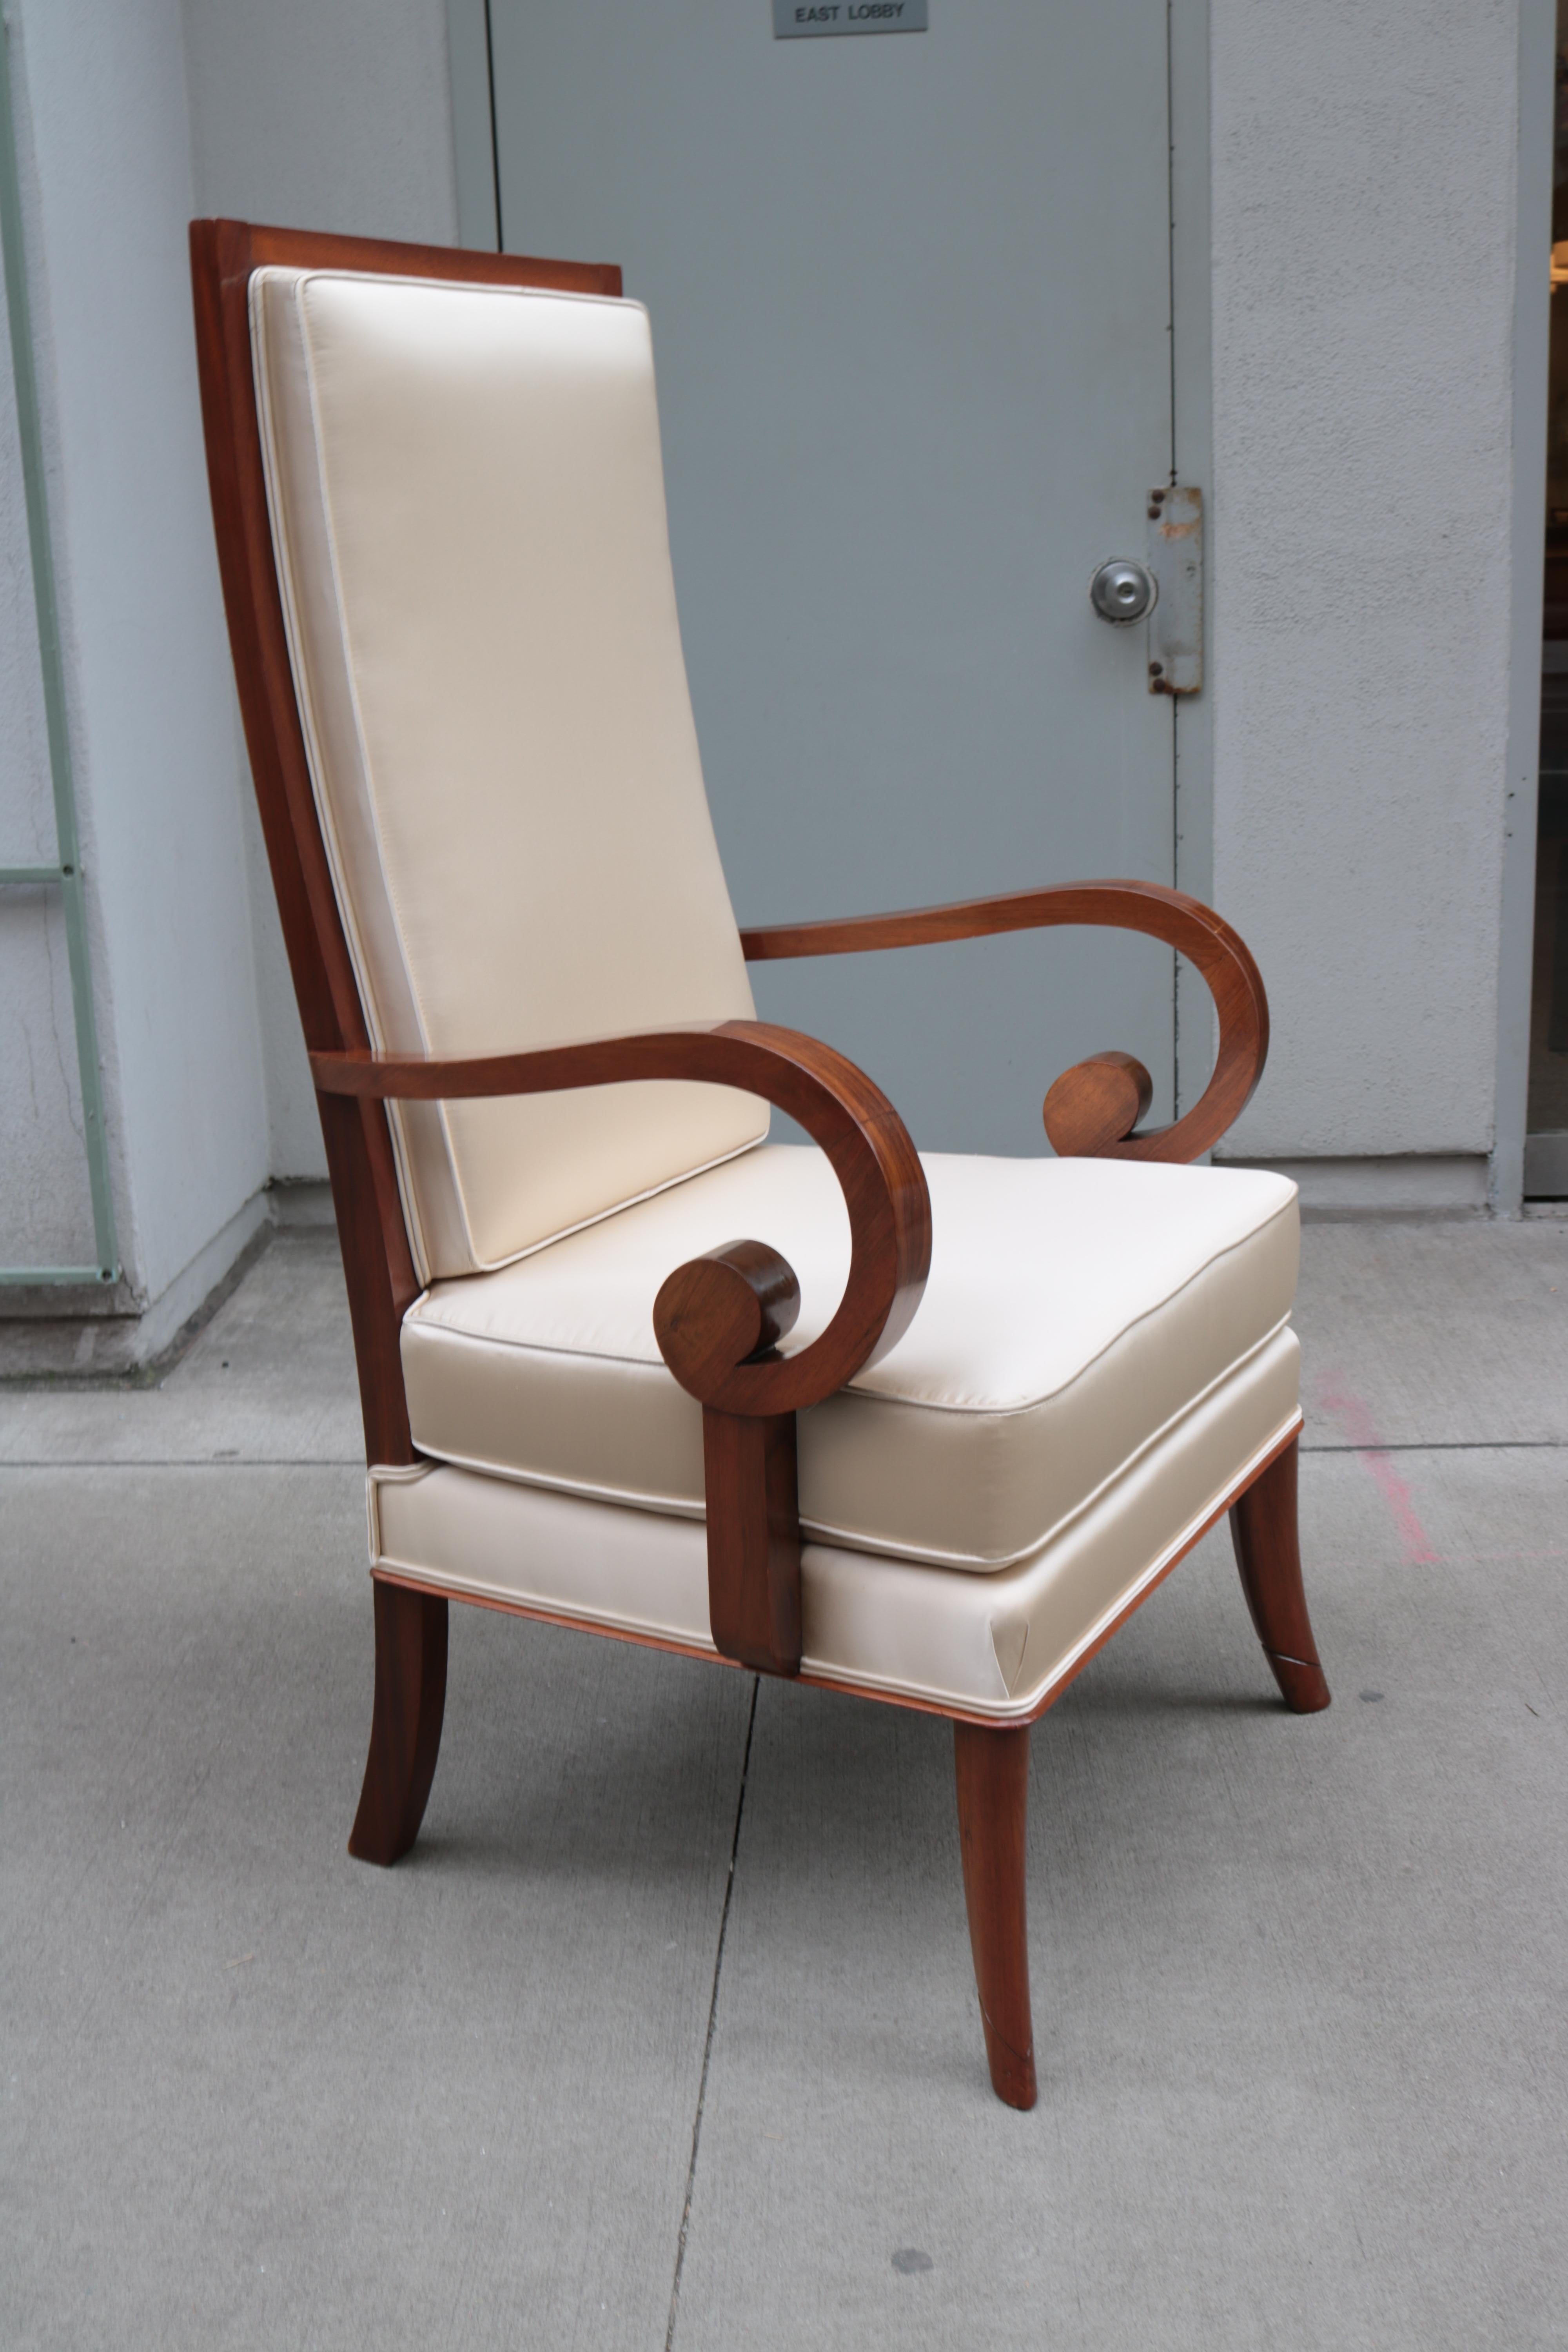 A single Art Deco tall back armchair with scrolled arms.
Walnut.